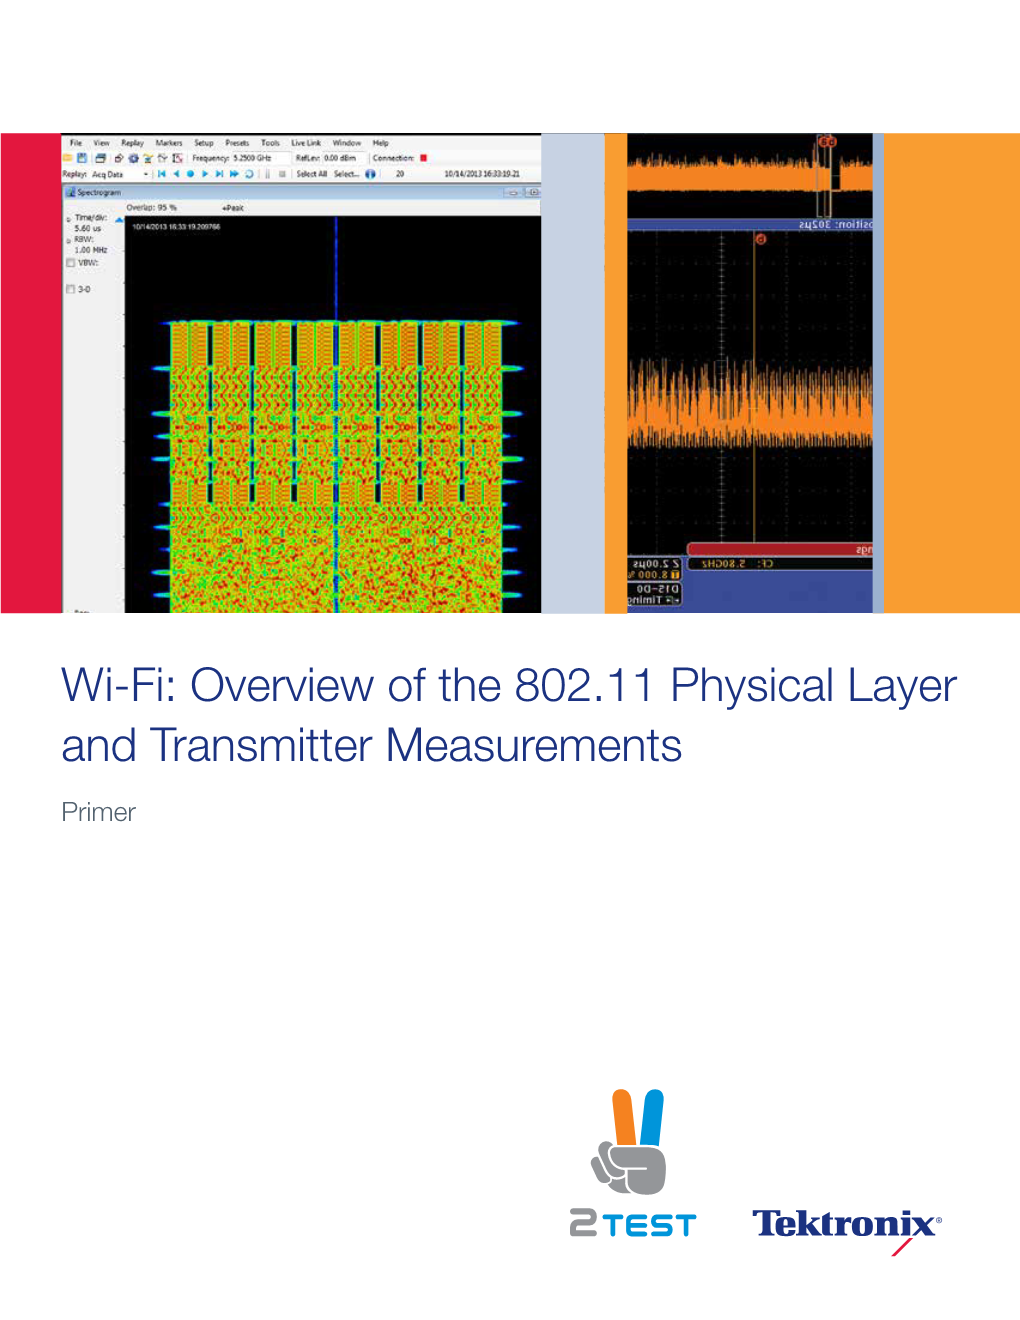 Wi-Fi: Overview of the 802.11 Physical Layer and Transmitter Measurements